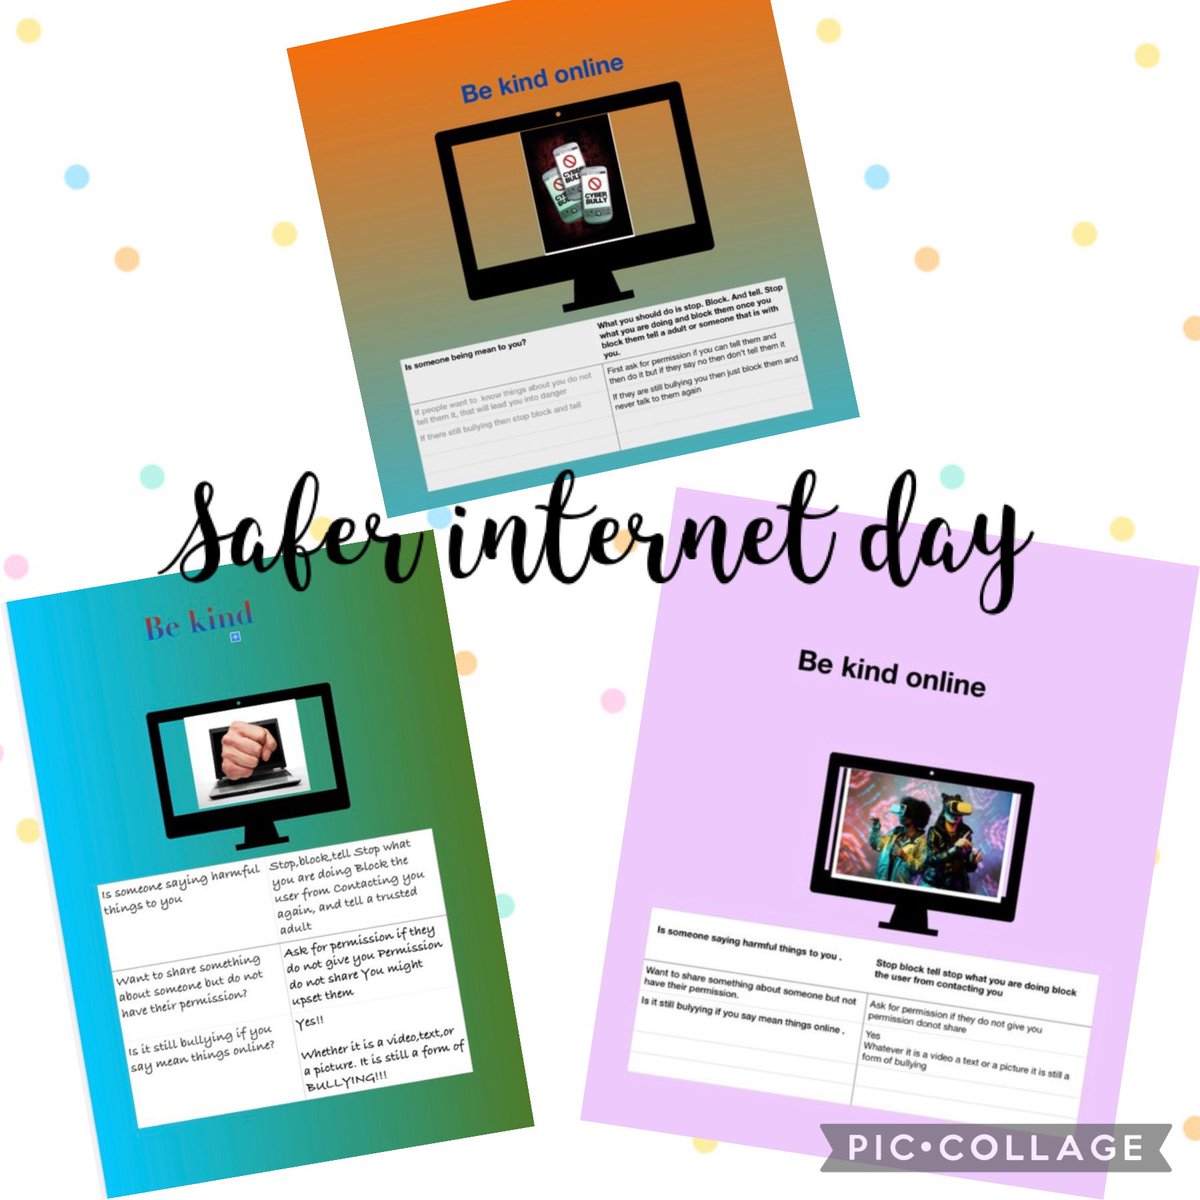 This week in computing, Class 8 have been thinking about how they can stay safe online 📱💻 #saferinternetday #sjsbcomputing @technolaedu